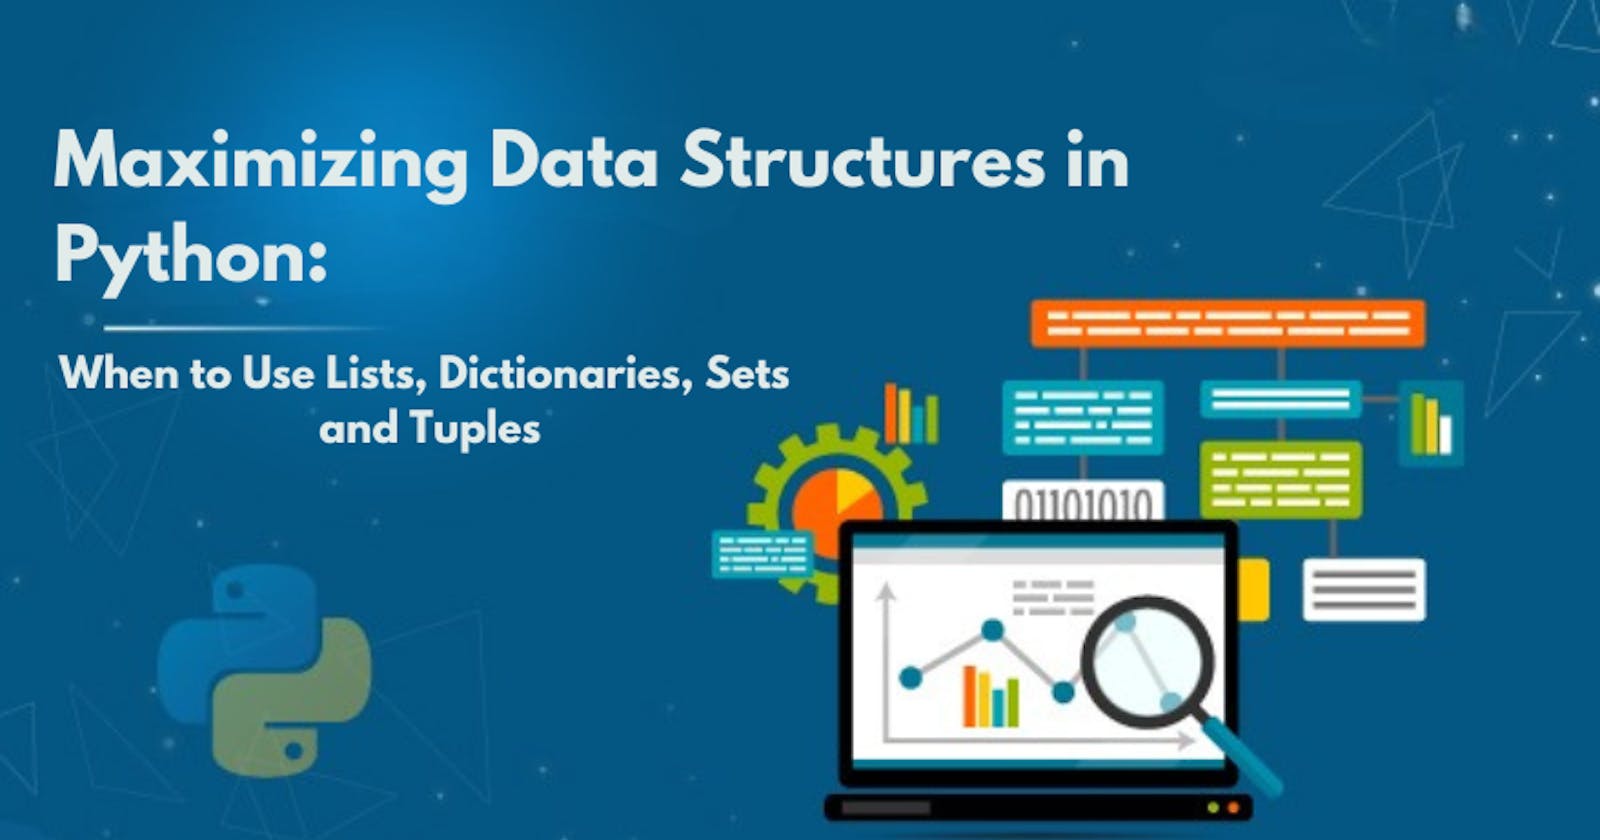 Maximizing Data Structures in Python: When to Use Lists, Dictionaries, Sets and Tuples